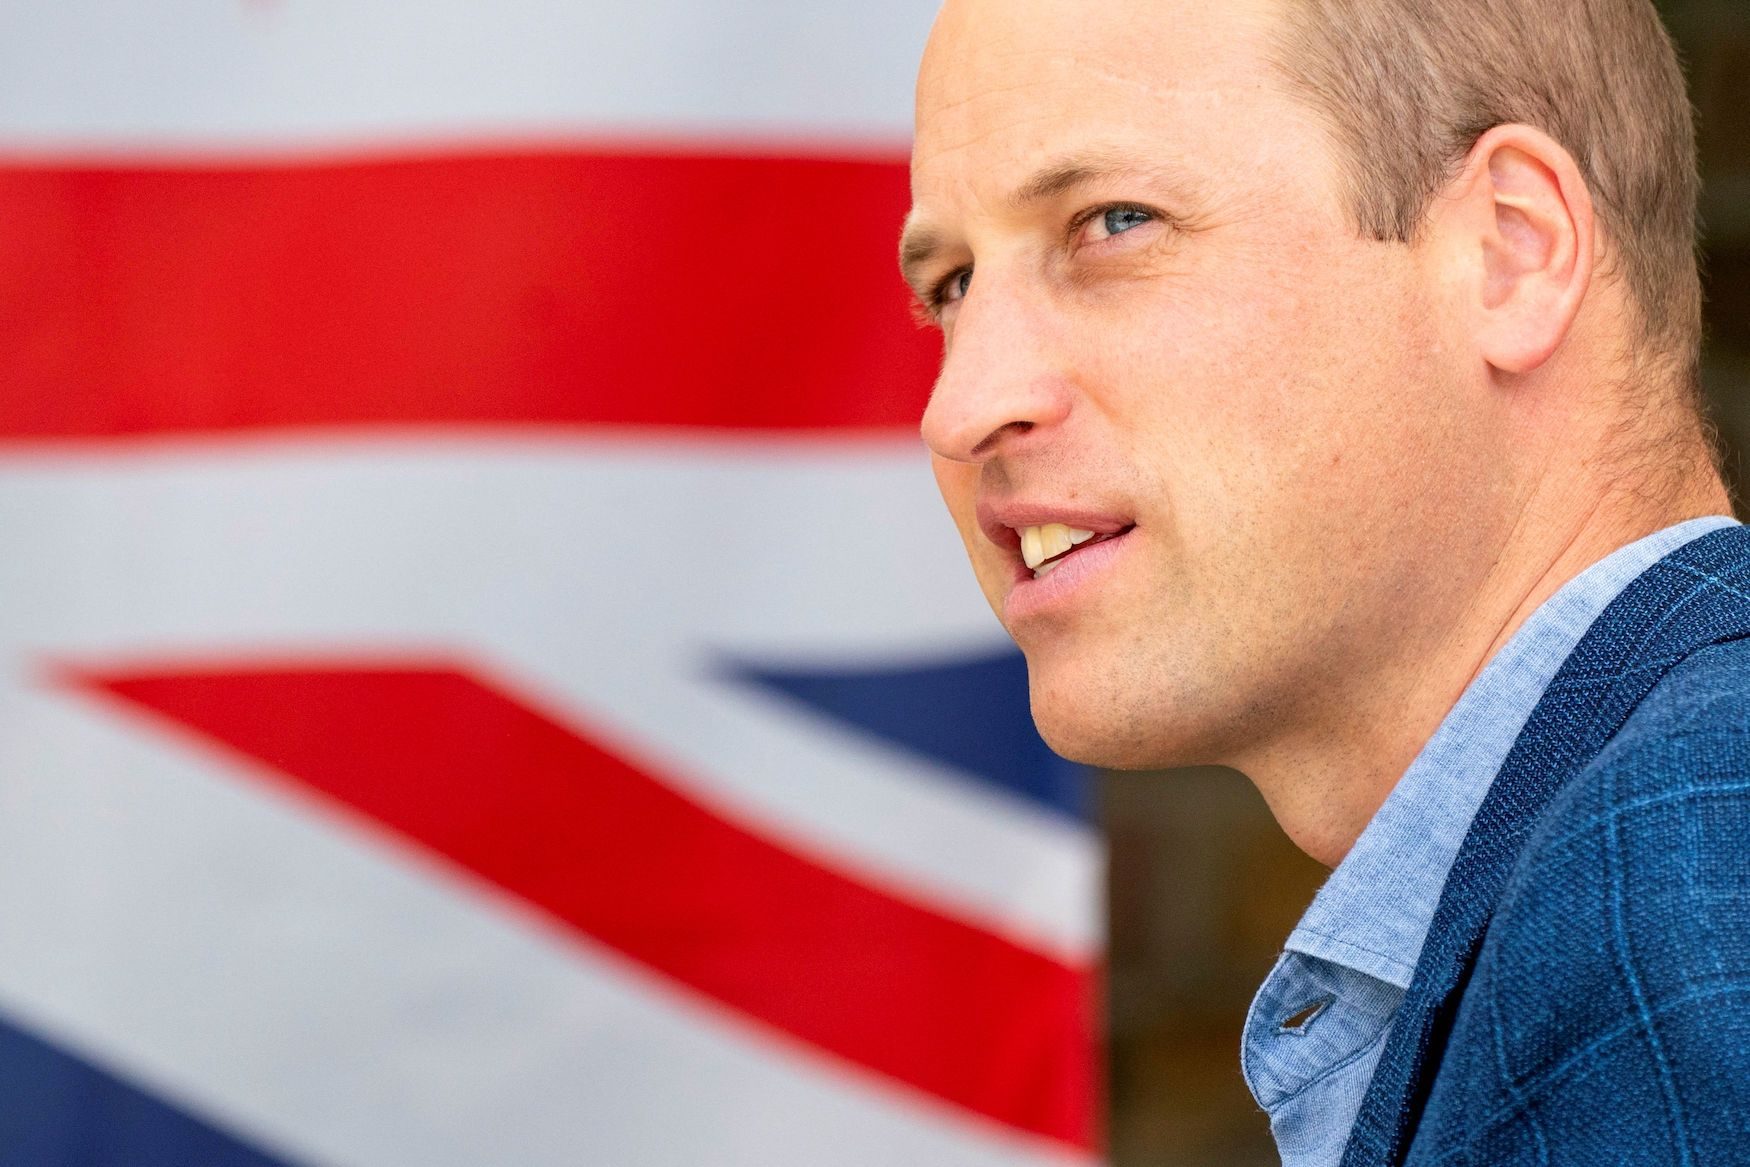 UK’s Prince William spotted selling homeless magazine on the streets of London